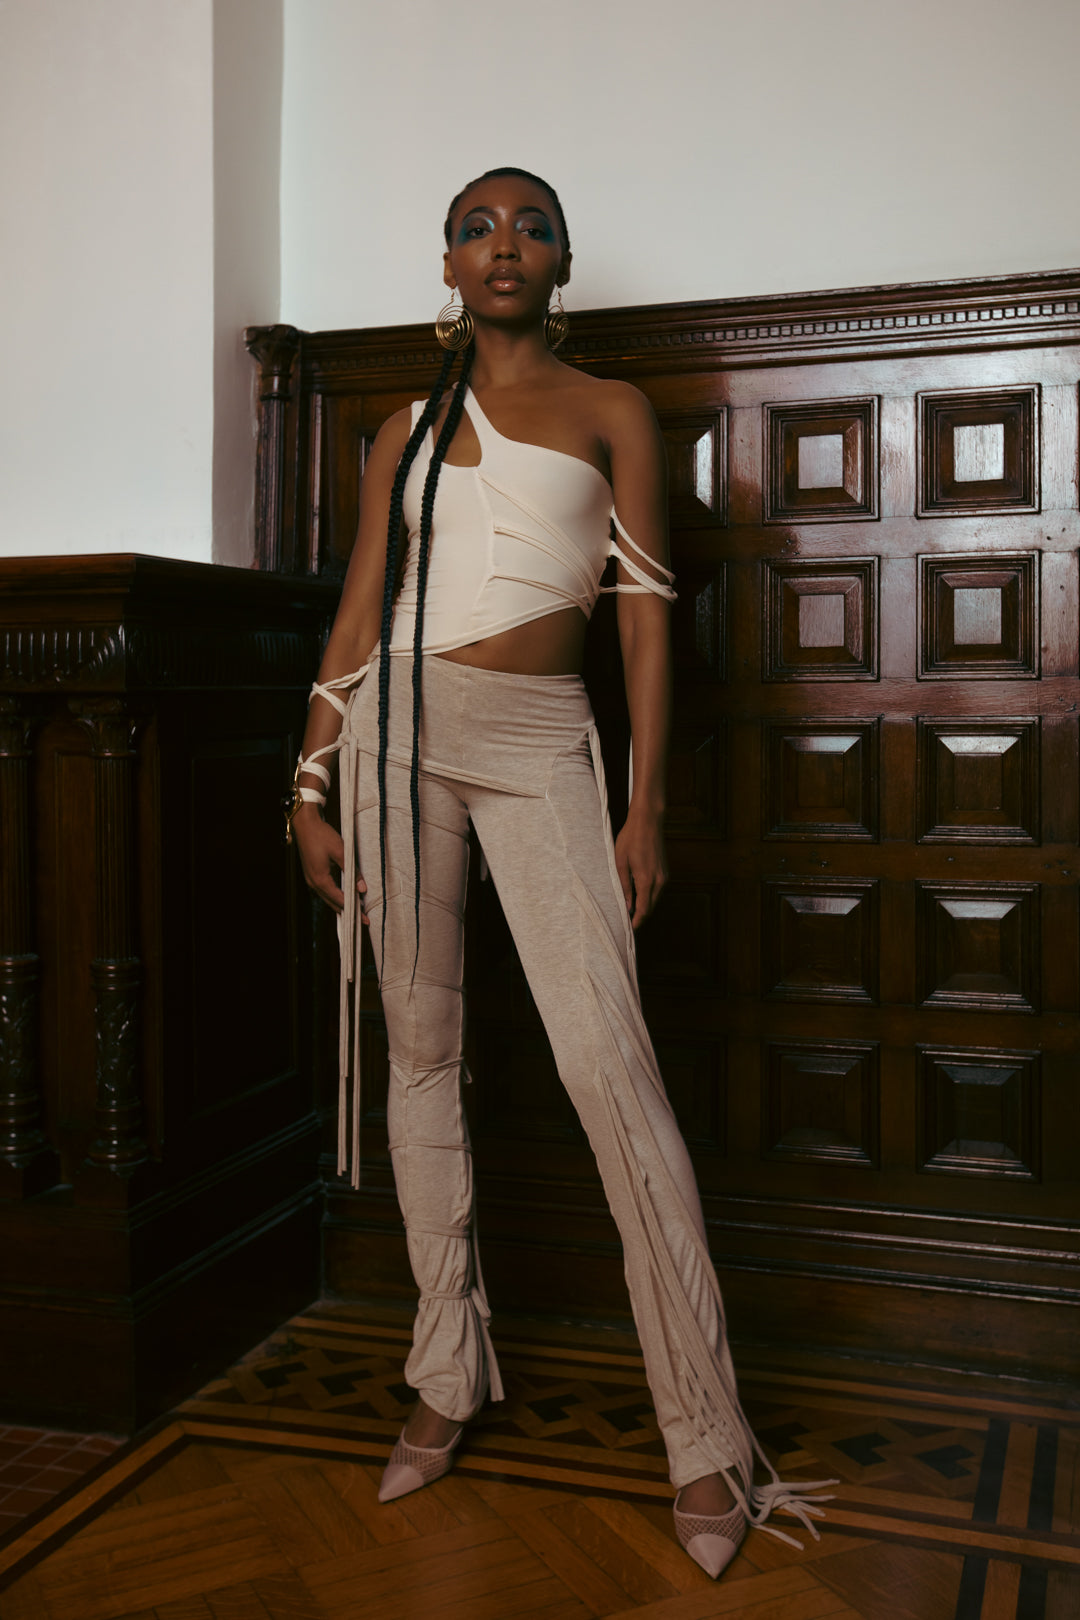 Strappy Mid-rise Pant - Oatmeal